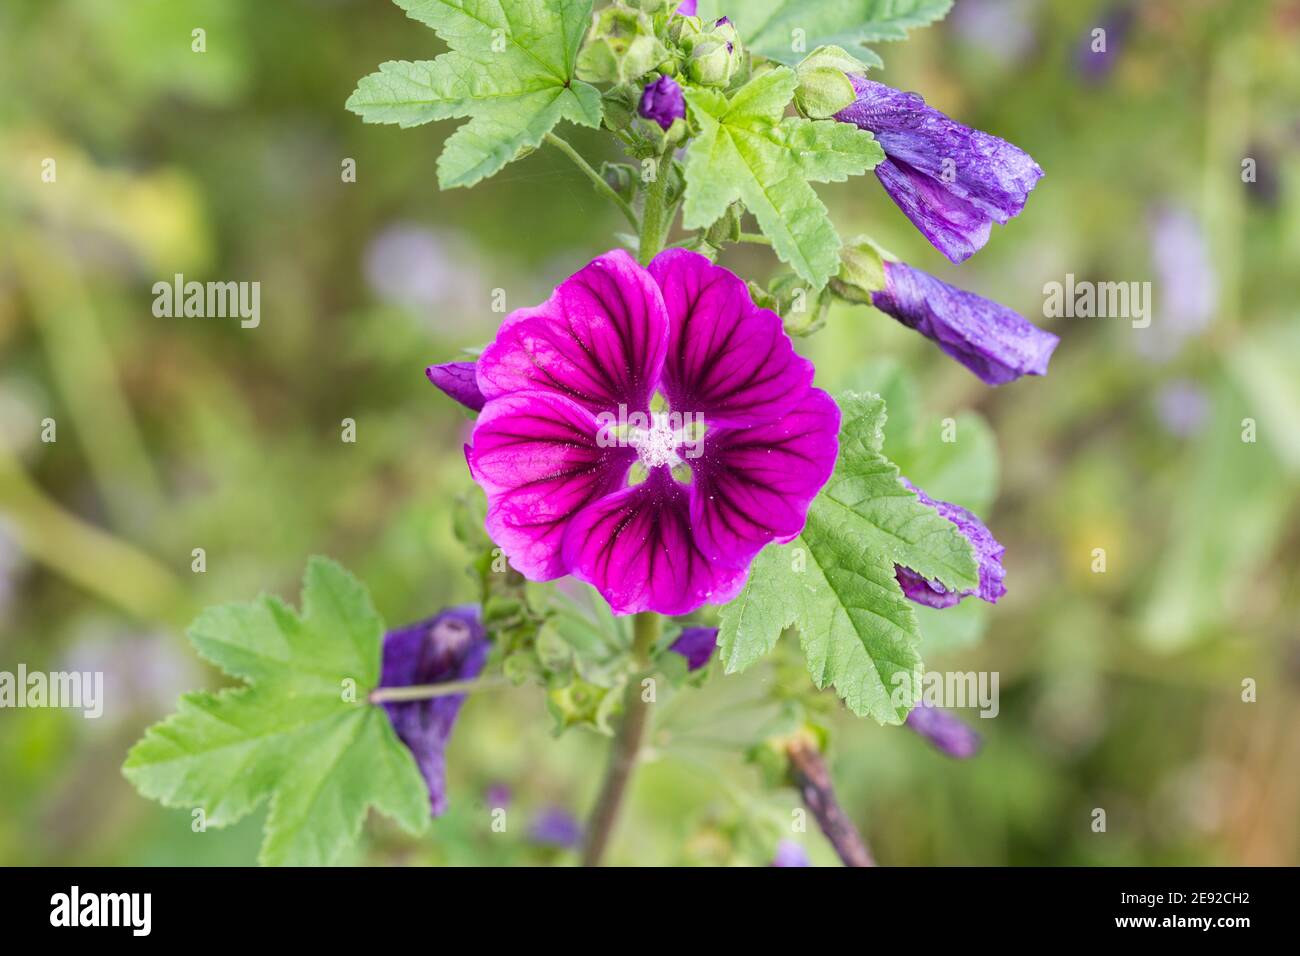 Blooming Malva sylvestris (commonly known as common mallow). Purple flower, blurry background. Stock Photo